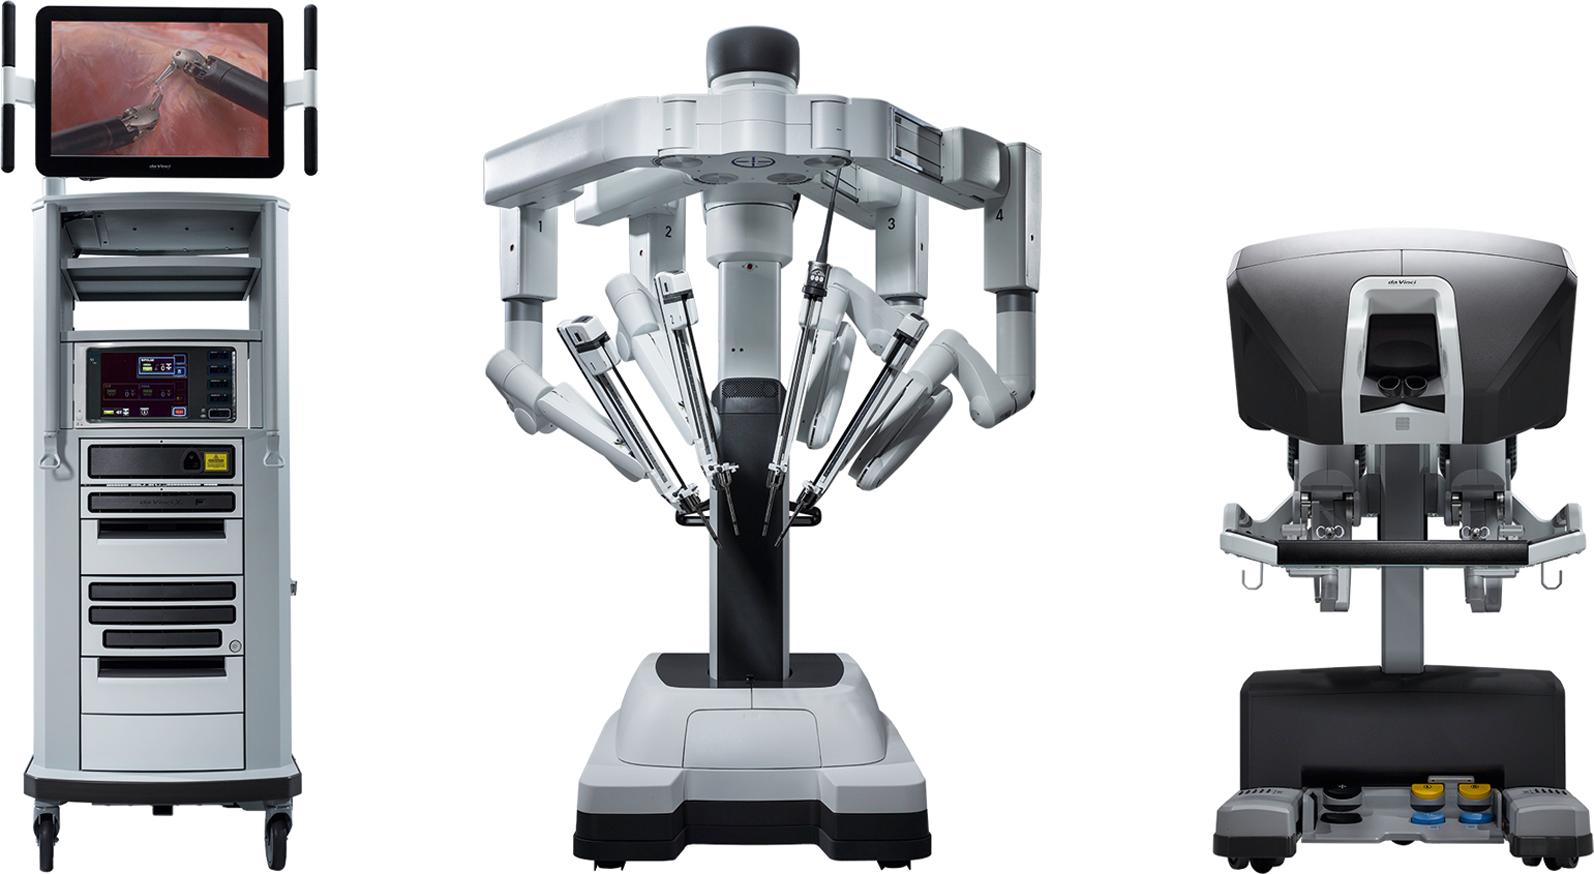 Figure 27-4, Da Vinci Xi (2014): The current and most popular robot to date. The vision and equipment cart with monitor is seen on the left. The surgical cart (the robot) is seen in the center, and the surgeon’s console is on the right. On this version, the telescope can be moved between all ports and the overhead boom can swivel to assist in instrument positioning.